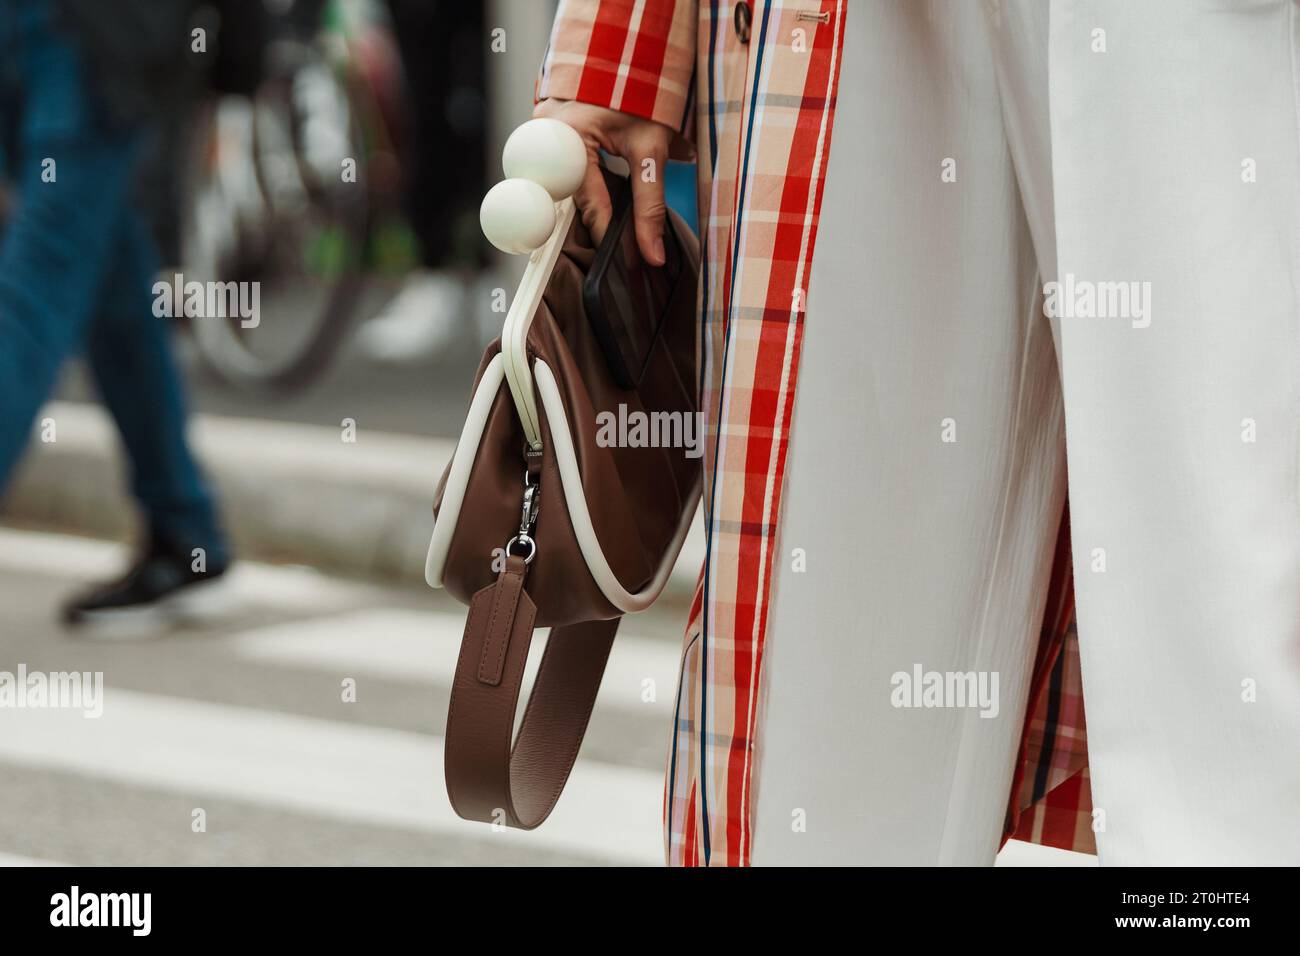 A guest wearing a checkered trench coat, white pants, a tie and brown bag, seen outside PRADA show during Milan Fashion Week Womenswear Spring/Summer Stock Photo